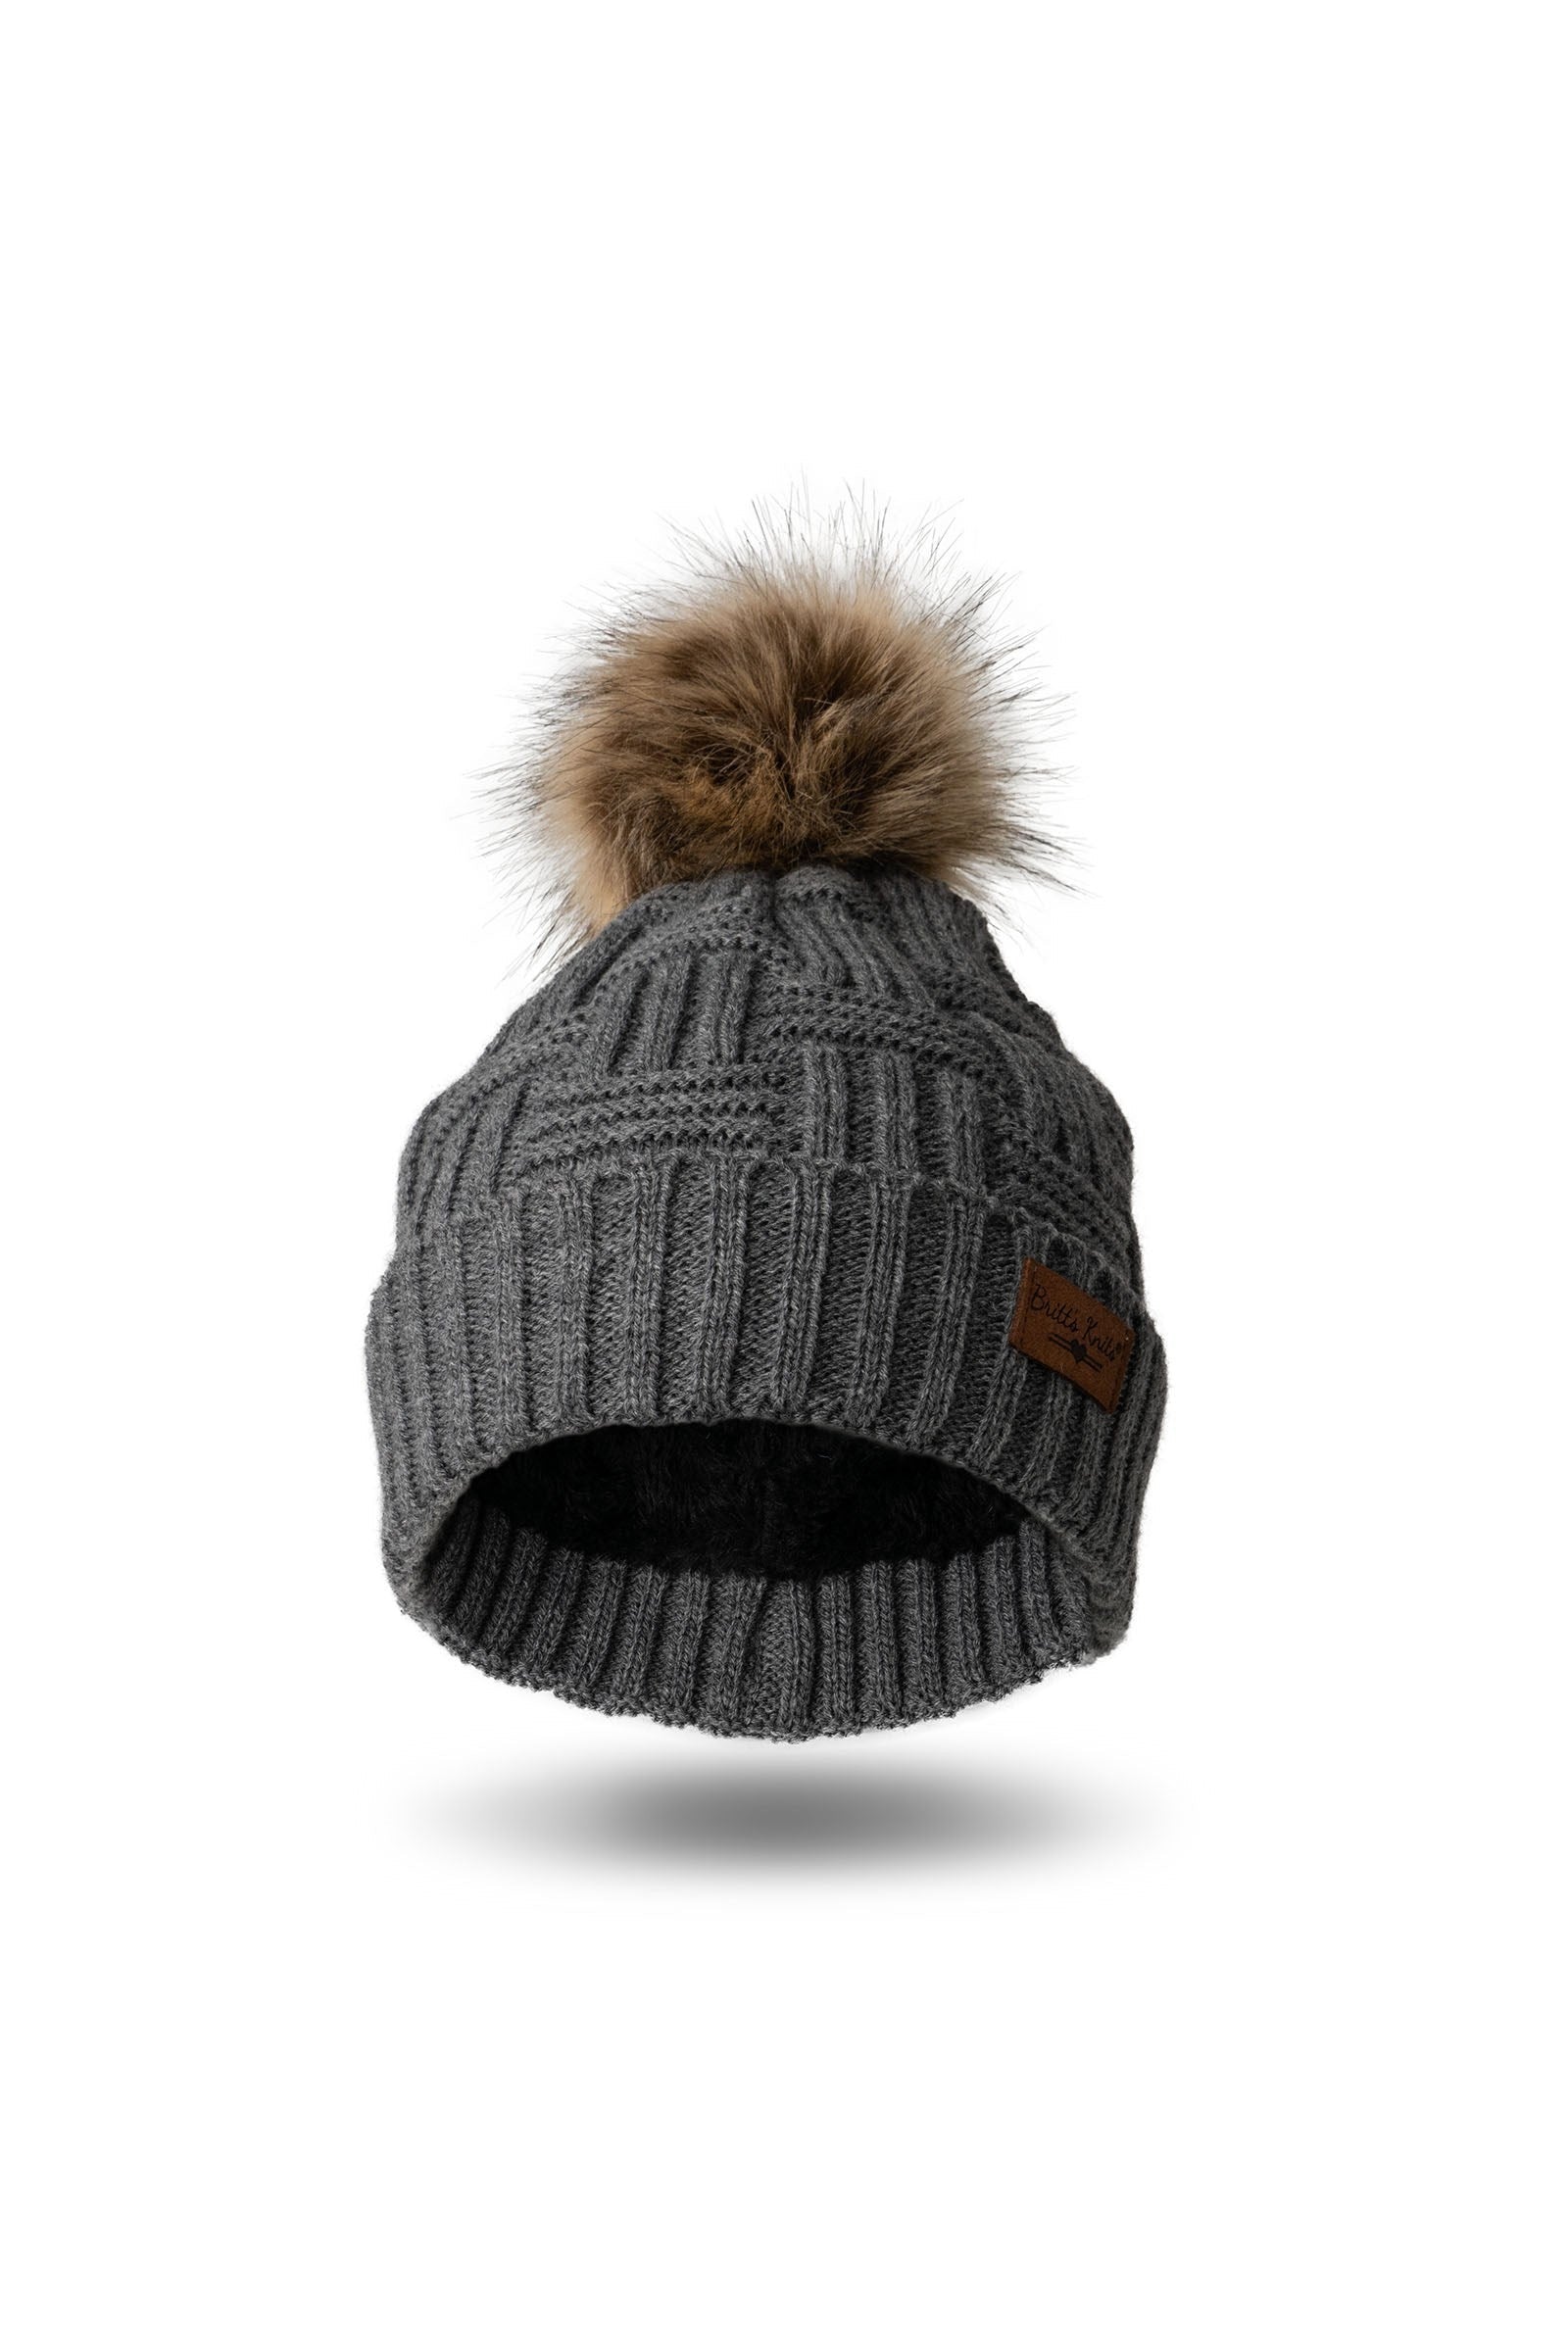 Shop Plush Lined Knit Pom Hat-Winter Hat at Ruby Joy Boutique, a Women's Clothing Store in Pickerington, Ohio